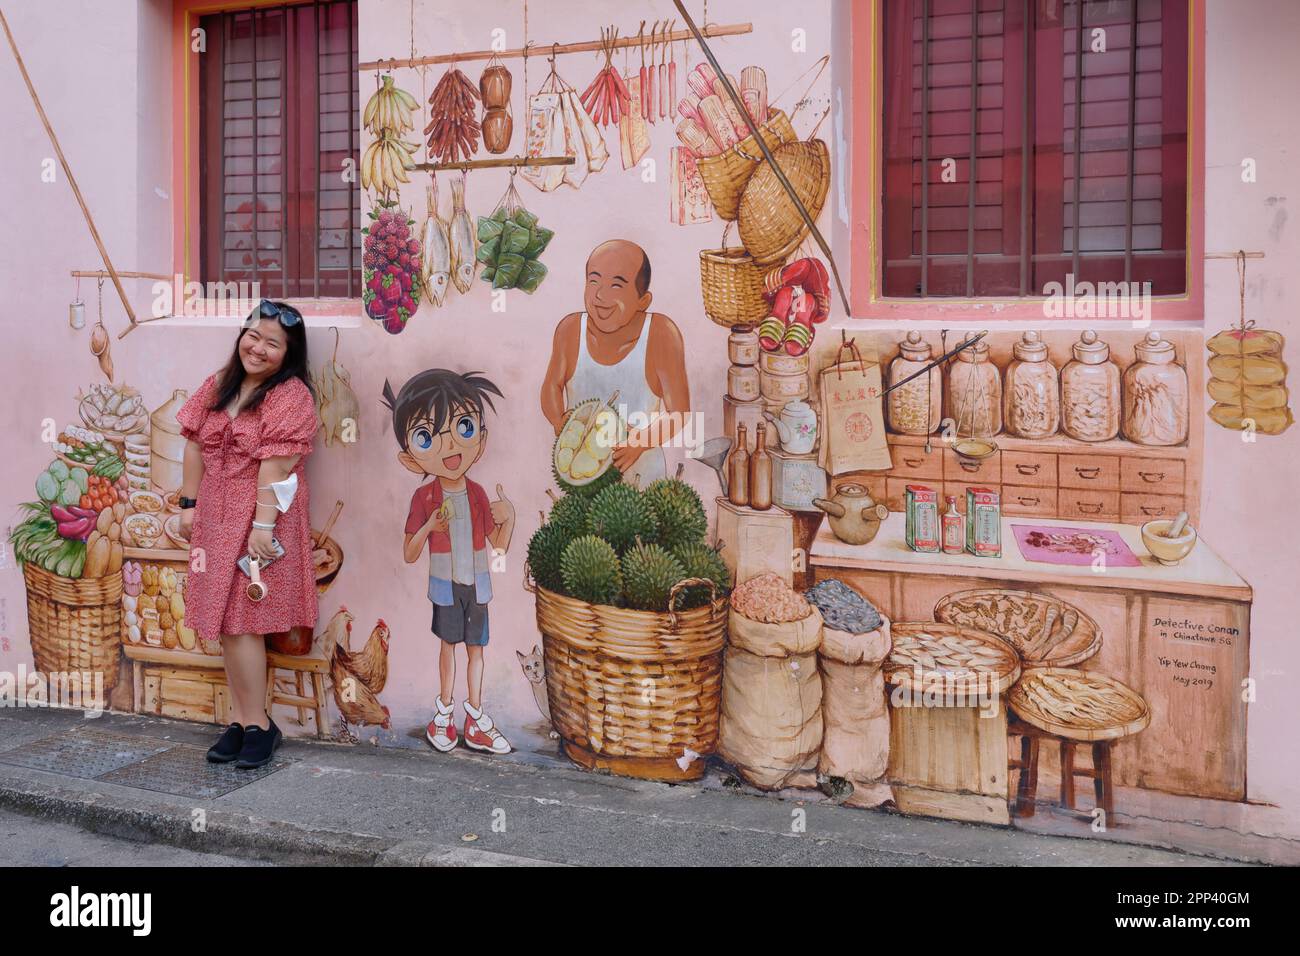 A female Thai tourist poses in front of a mural by artist Yip Yew Chong in Chinatown, Singapore, depicting a Chinese vendor of durians and other foods Stock Photo